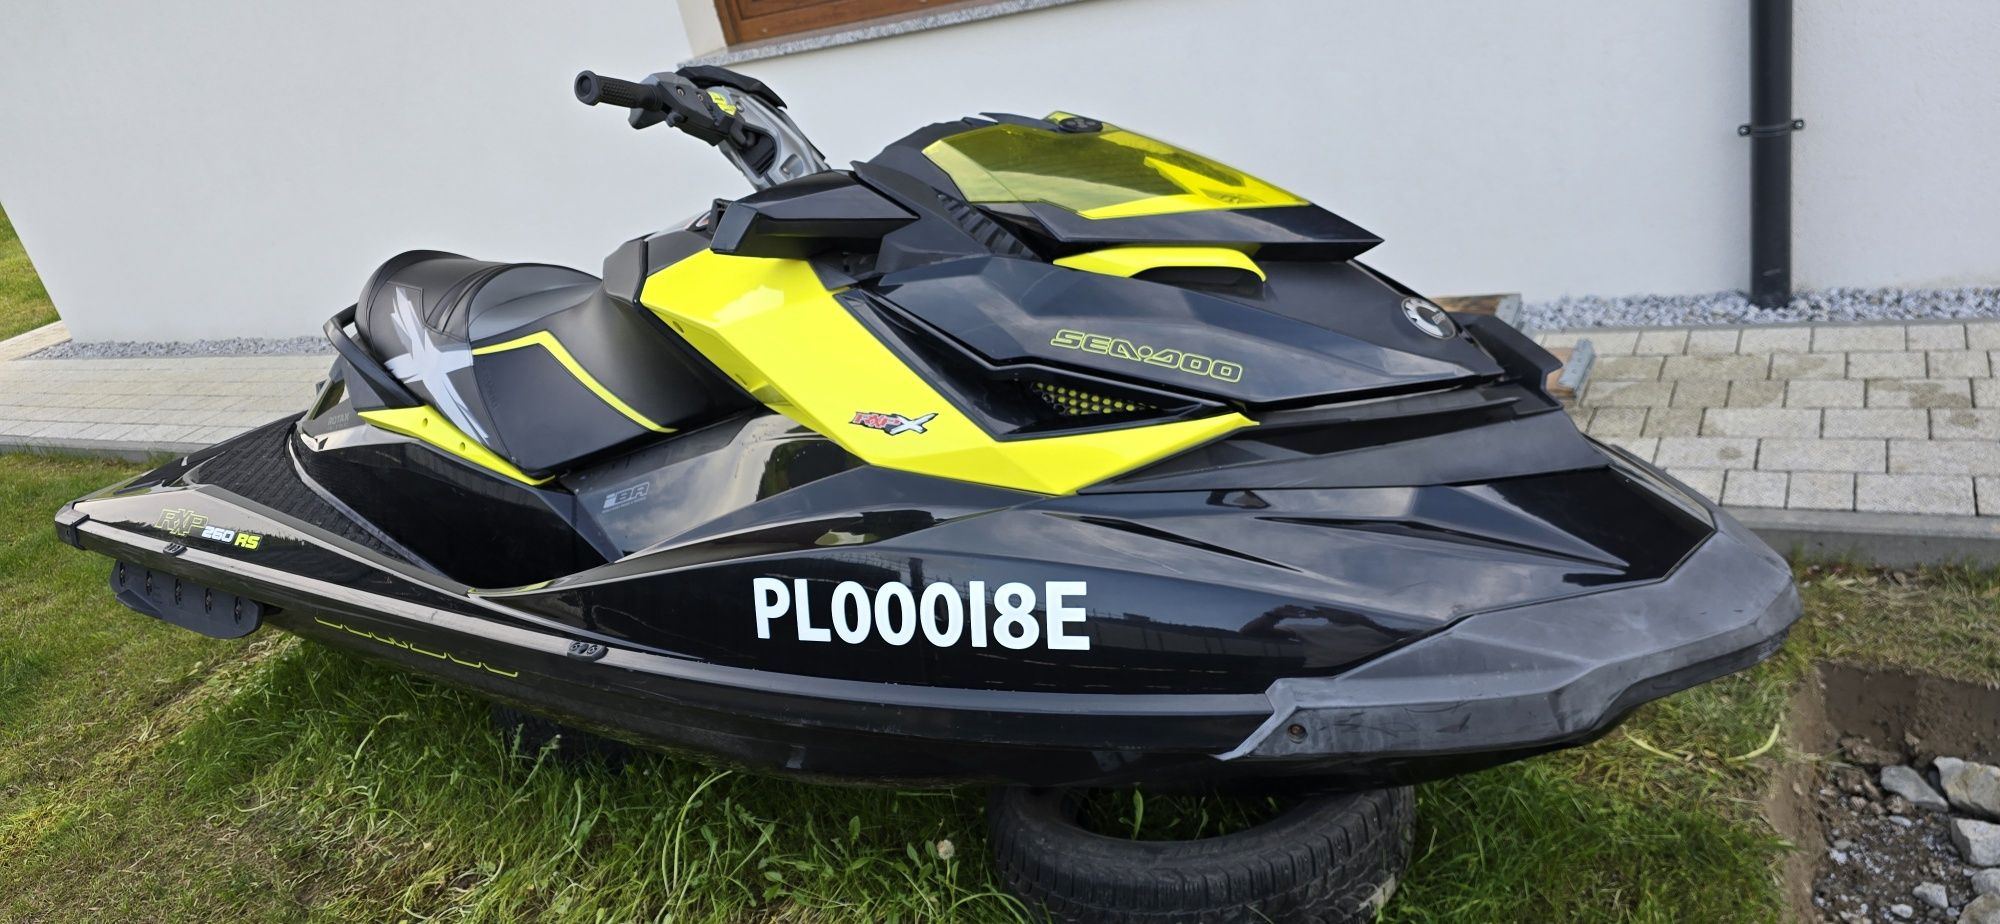 Skuter wodny Seadoo rxp- 260 rs